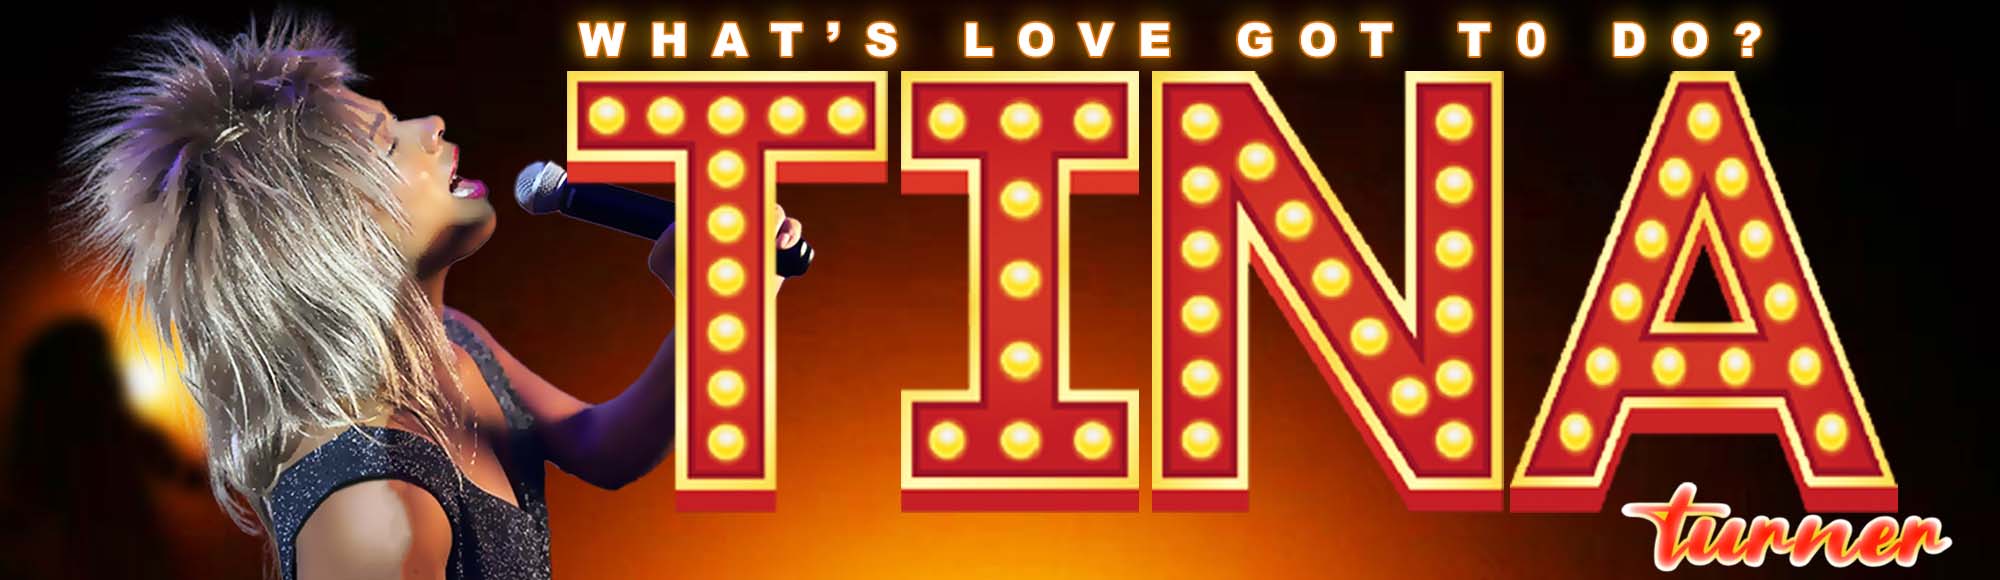 Tina Turner Tribute Show - What's Love Got To Do show